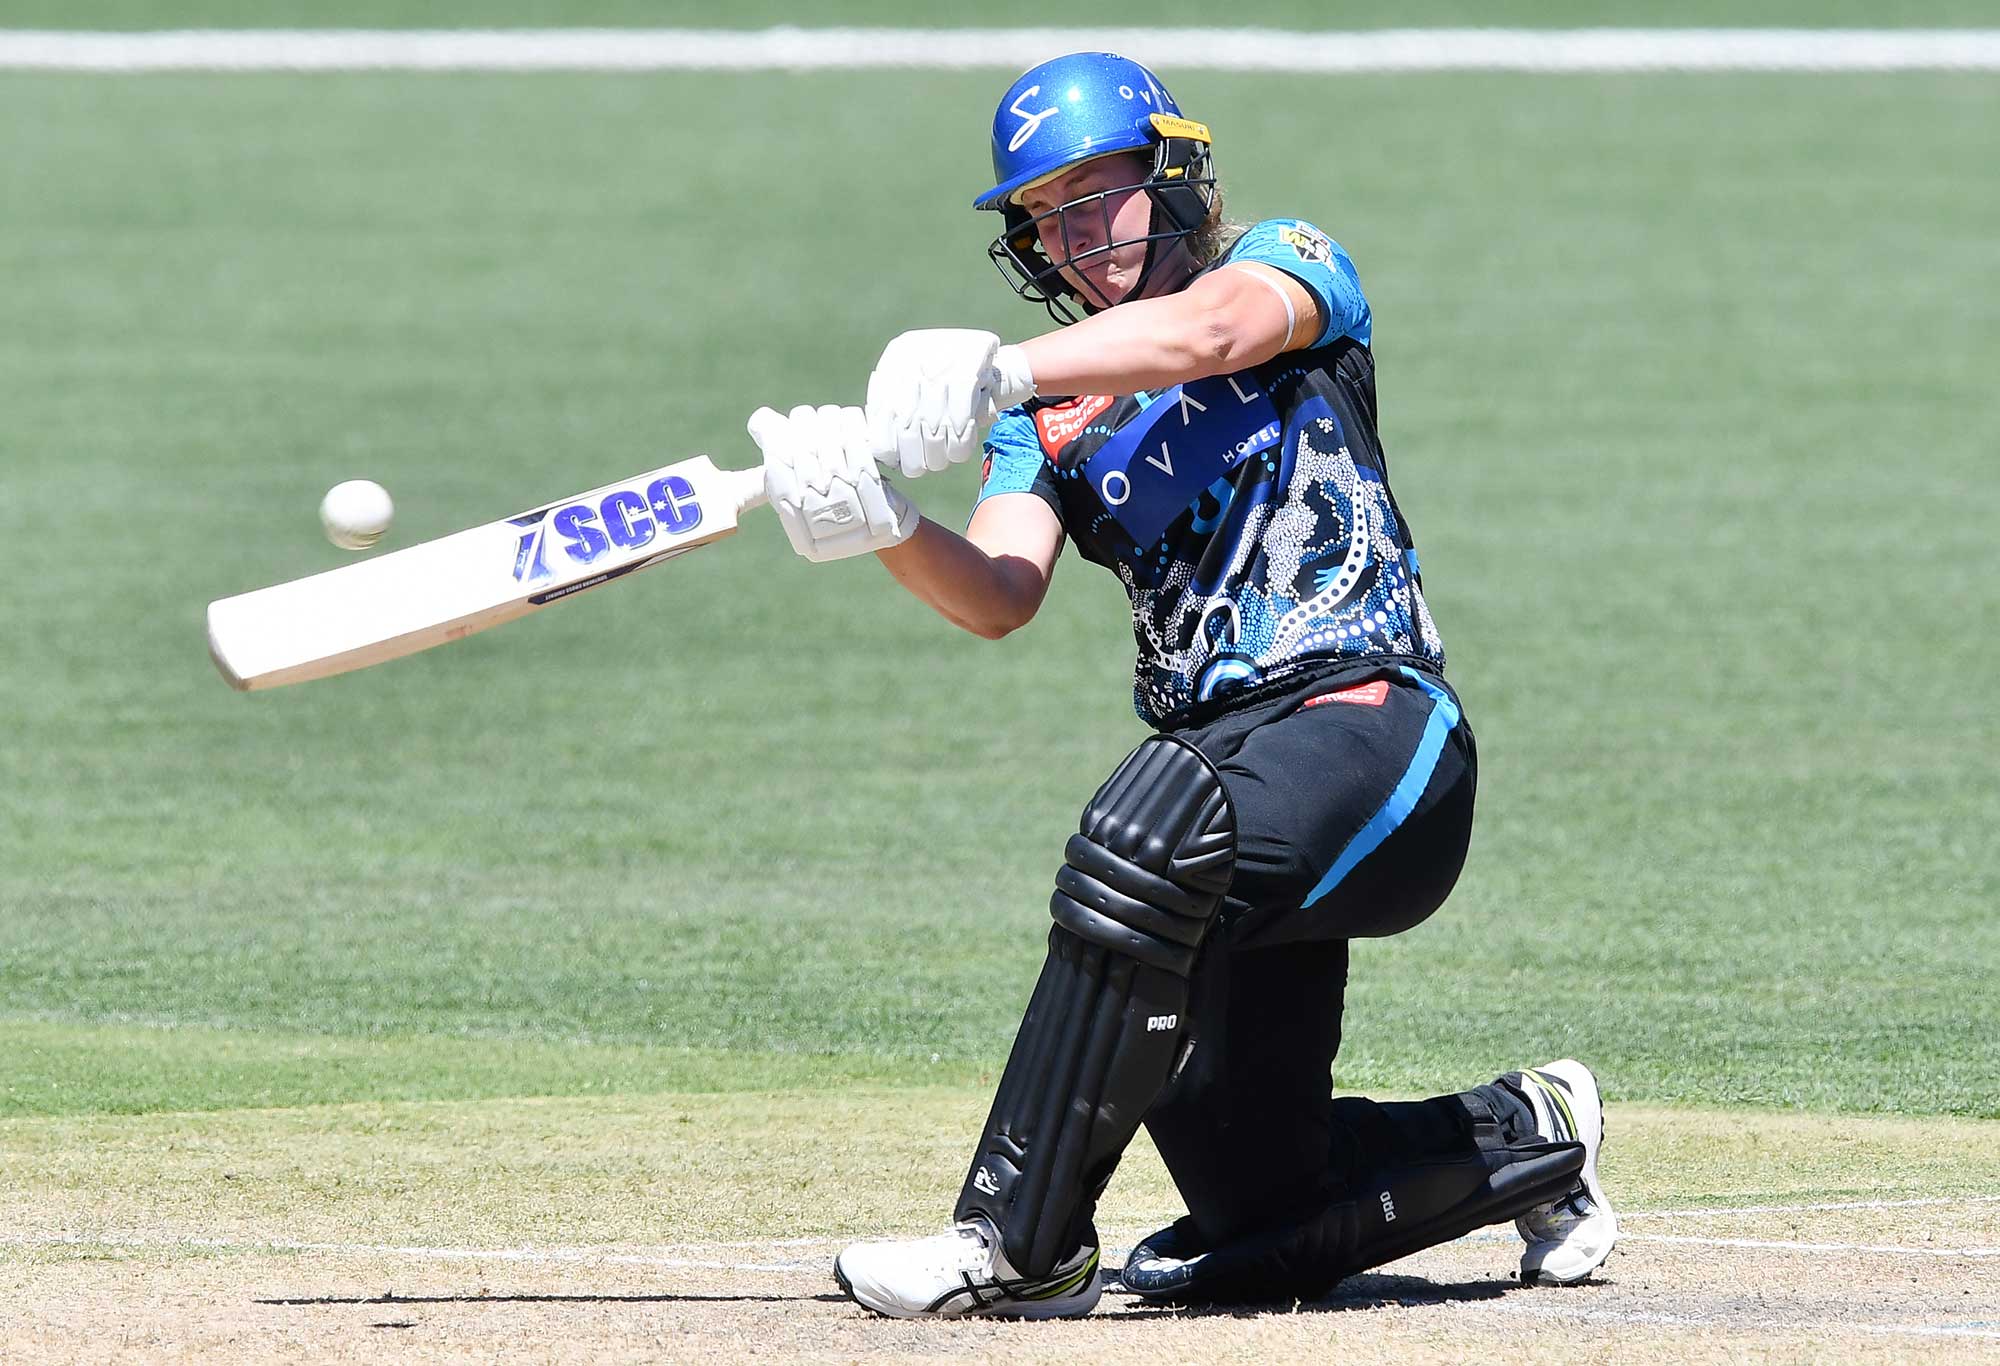 Maddie Penna of the Adelaide Strikers bats